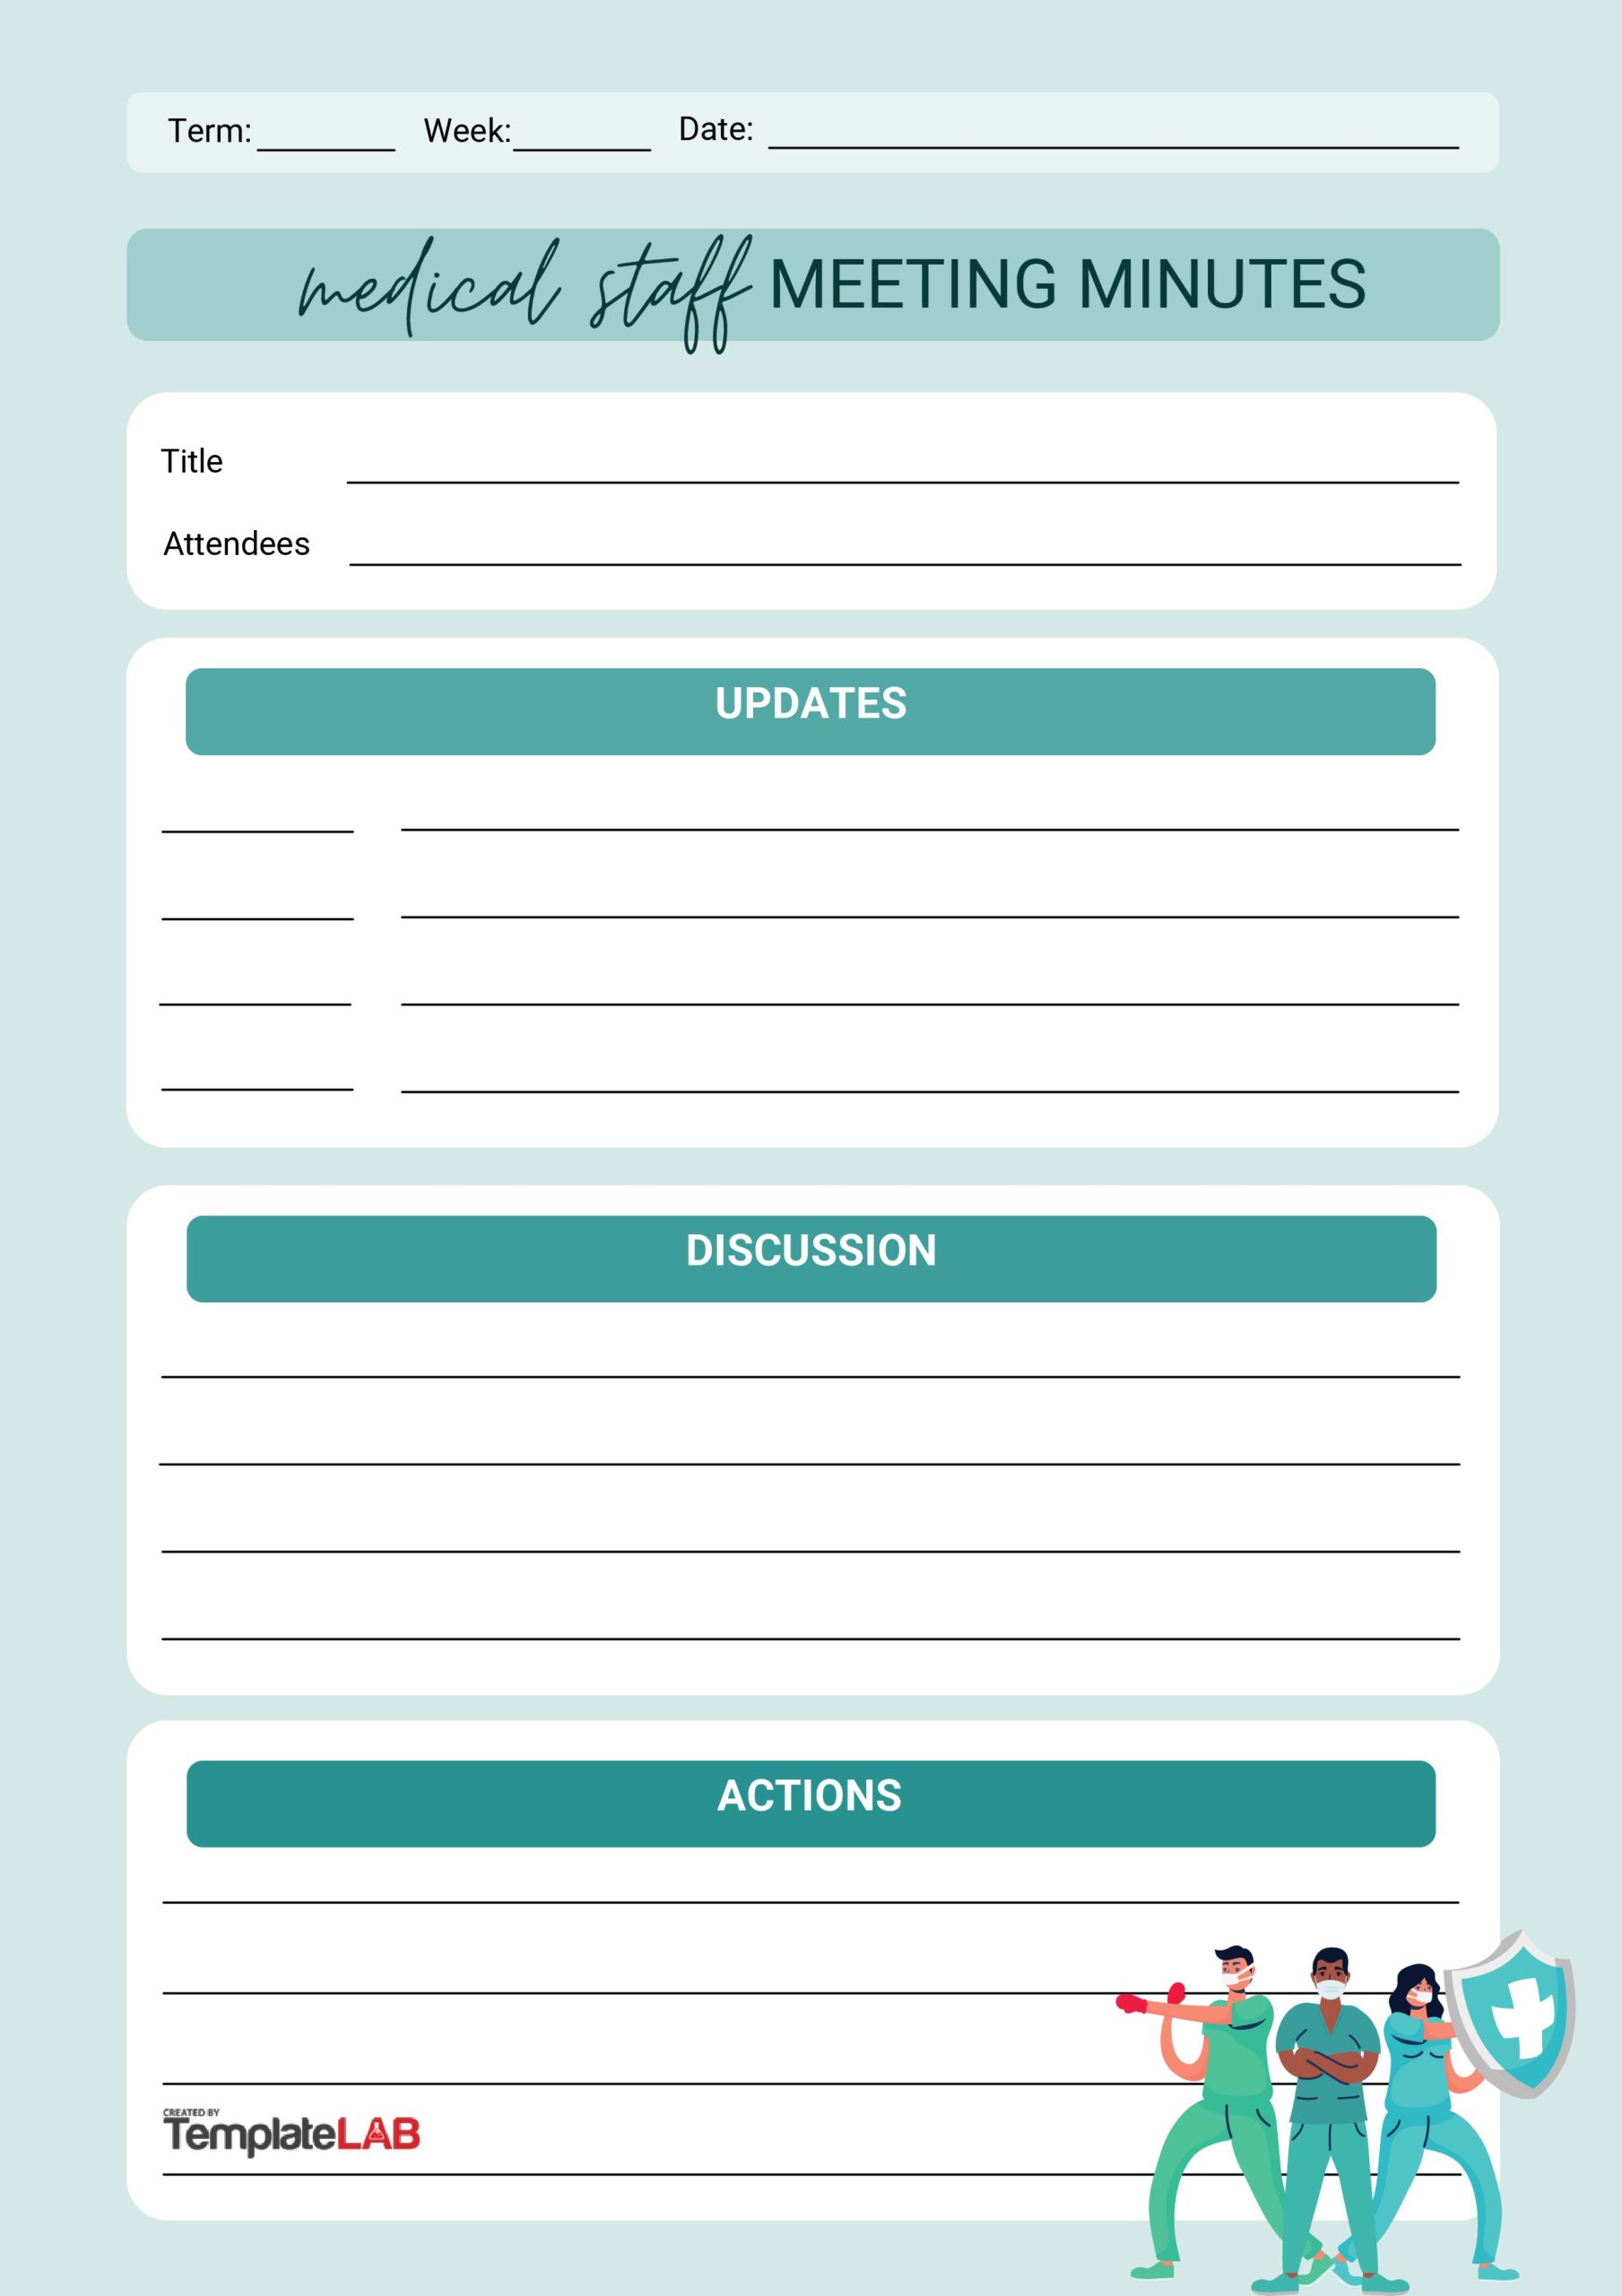 Free Medical Staff Meeting Minutes Template